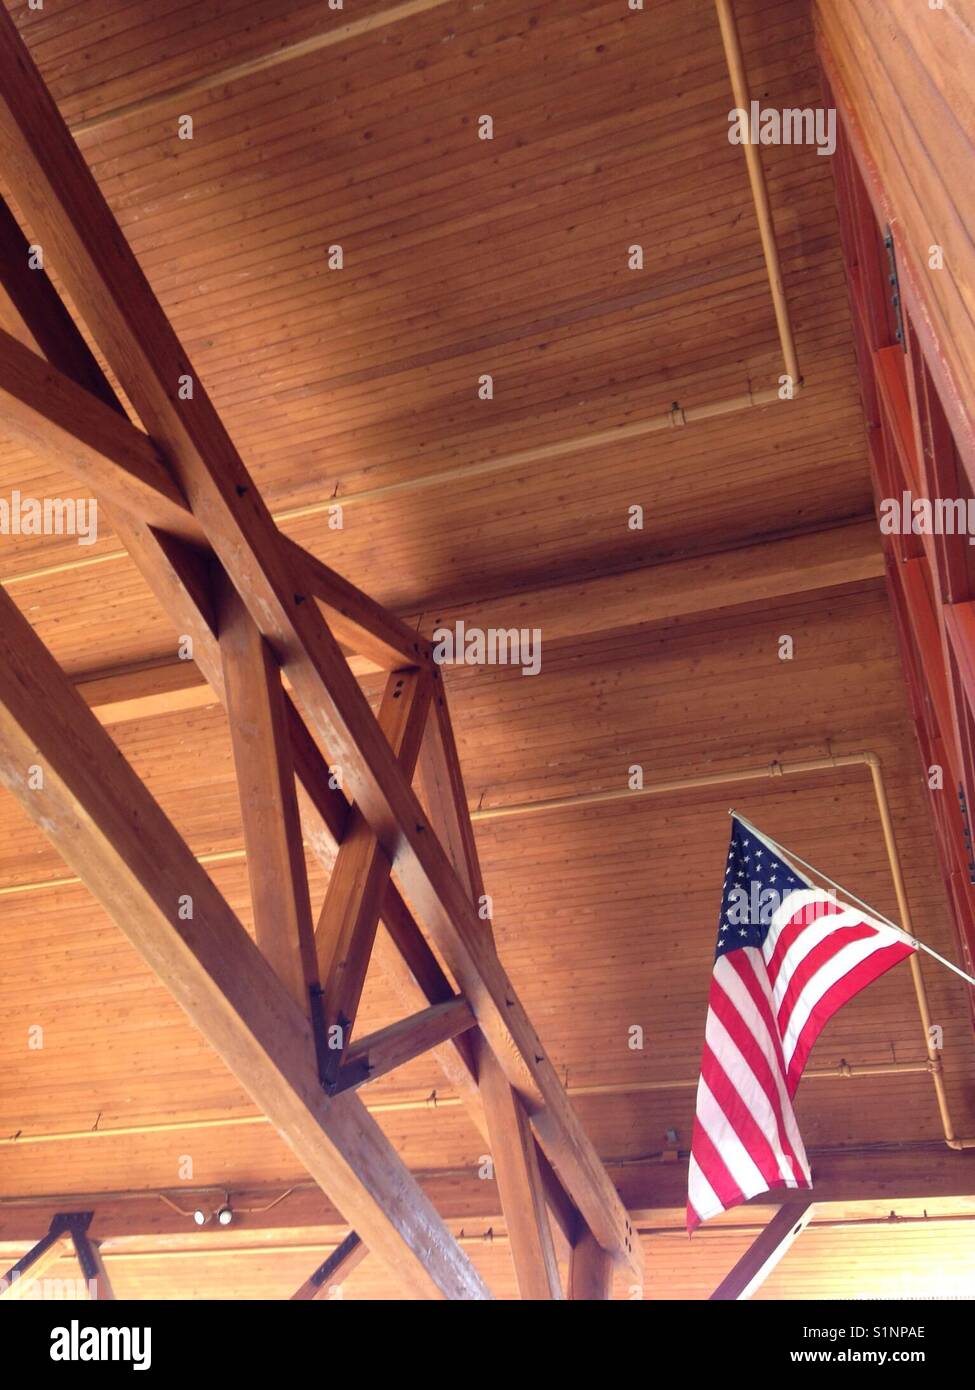 Wooden beams on a ceiling with an American flag displayed. Stock Photo